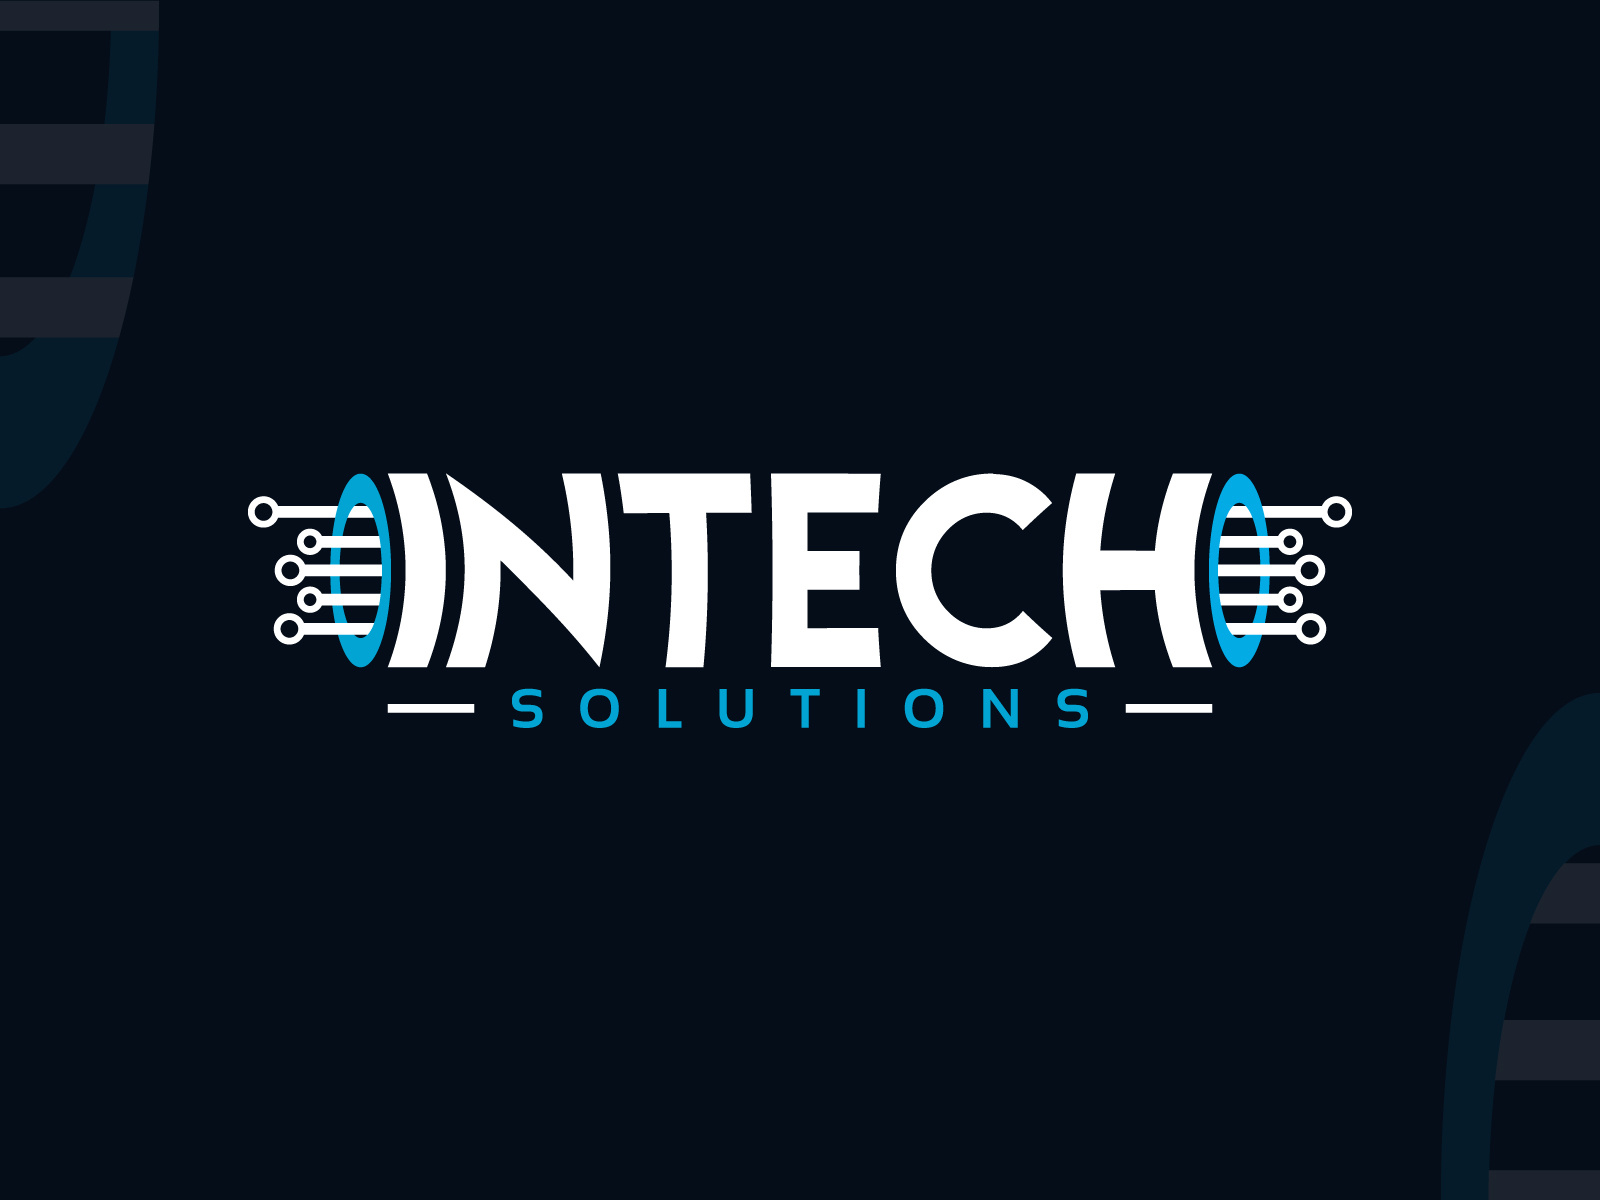 INTECH SOLUTIONS Logo Design and Visual Identity by MD Sayed Anowar on ...